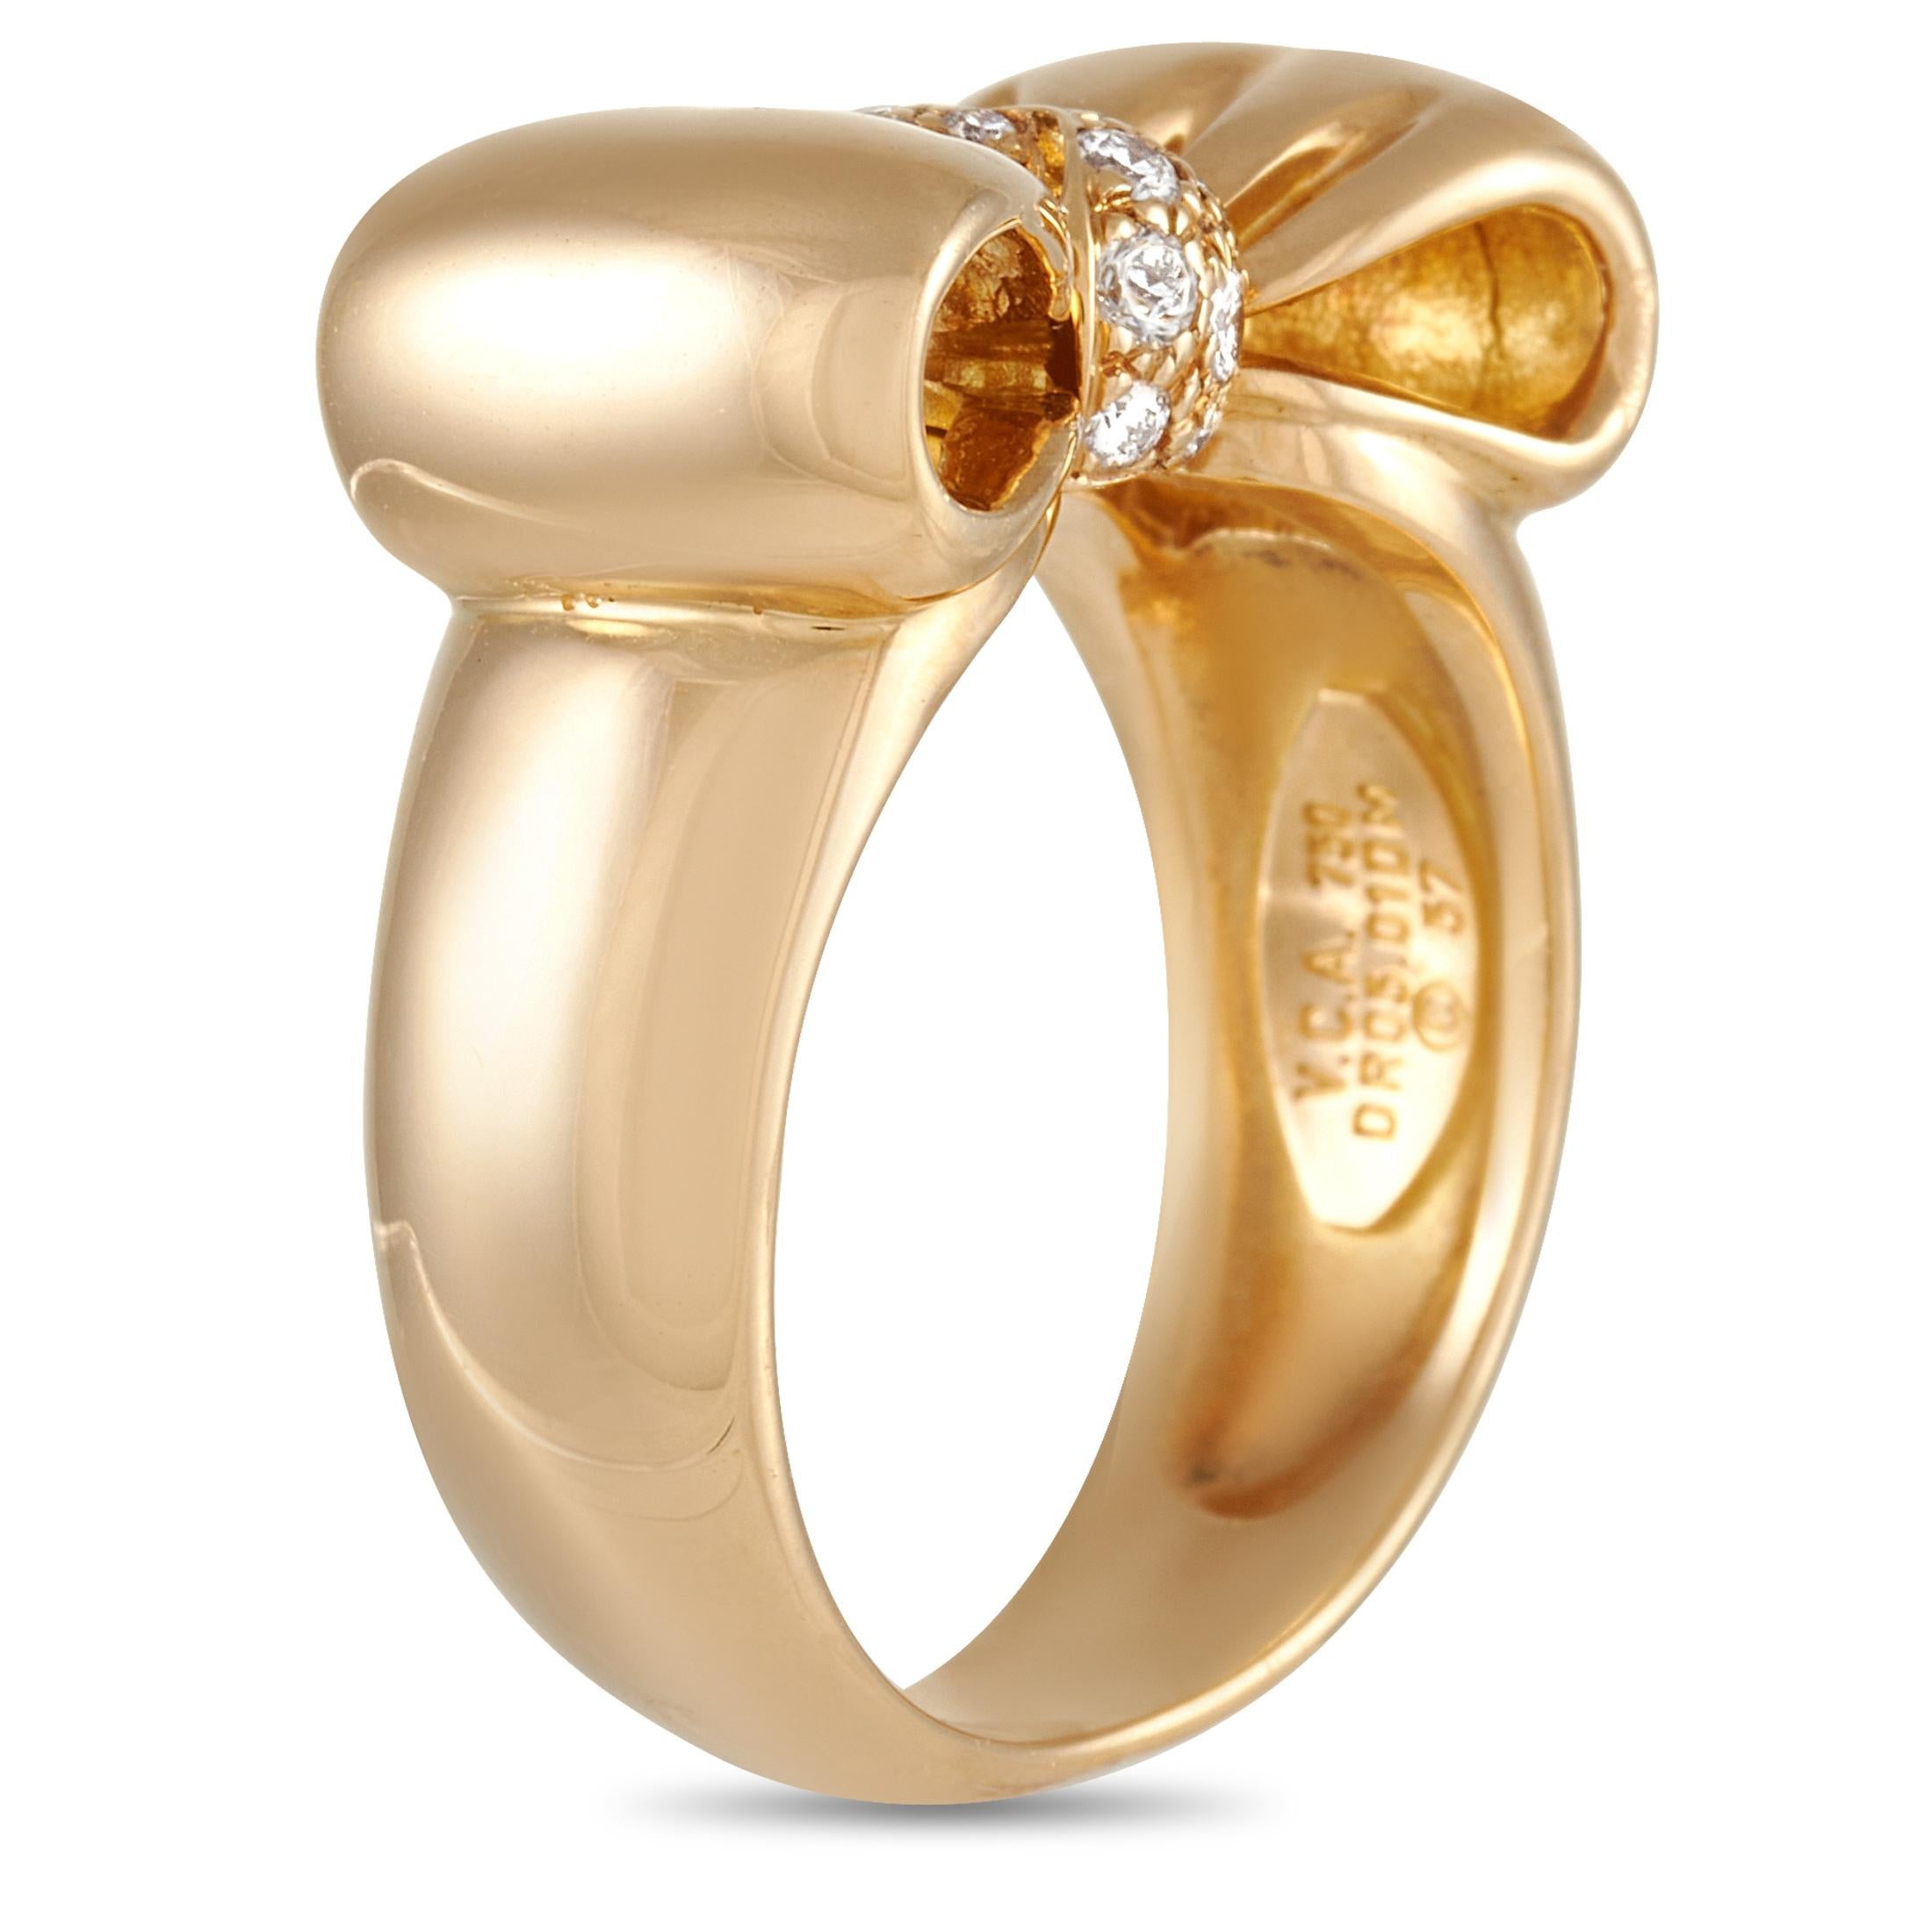 This Van Cleef & Arpels 18K Yellow Gold 0.20 ct Diamond Bow Ring is a cute statement piece, shaped to look like a ribbon and set with 0.20 carats of round diamonds. The ring has a band thickness of 7 mm, a top height of 6 mm, and top dimensions of